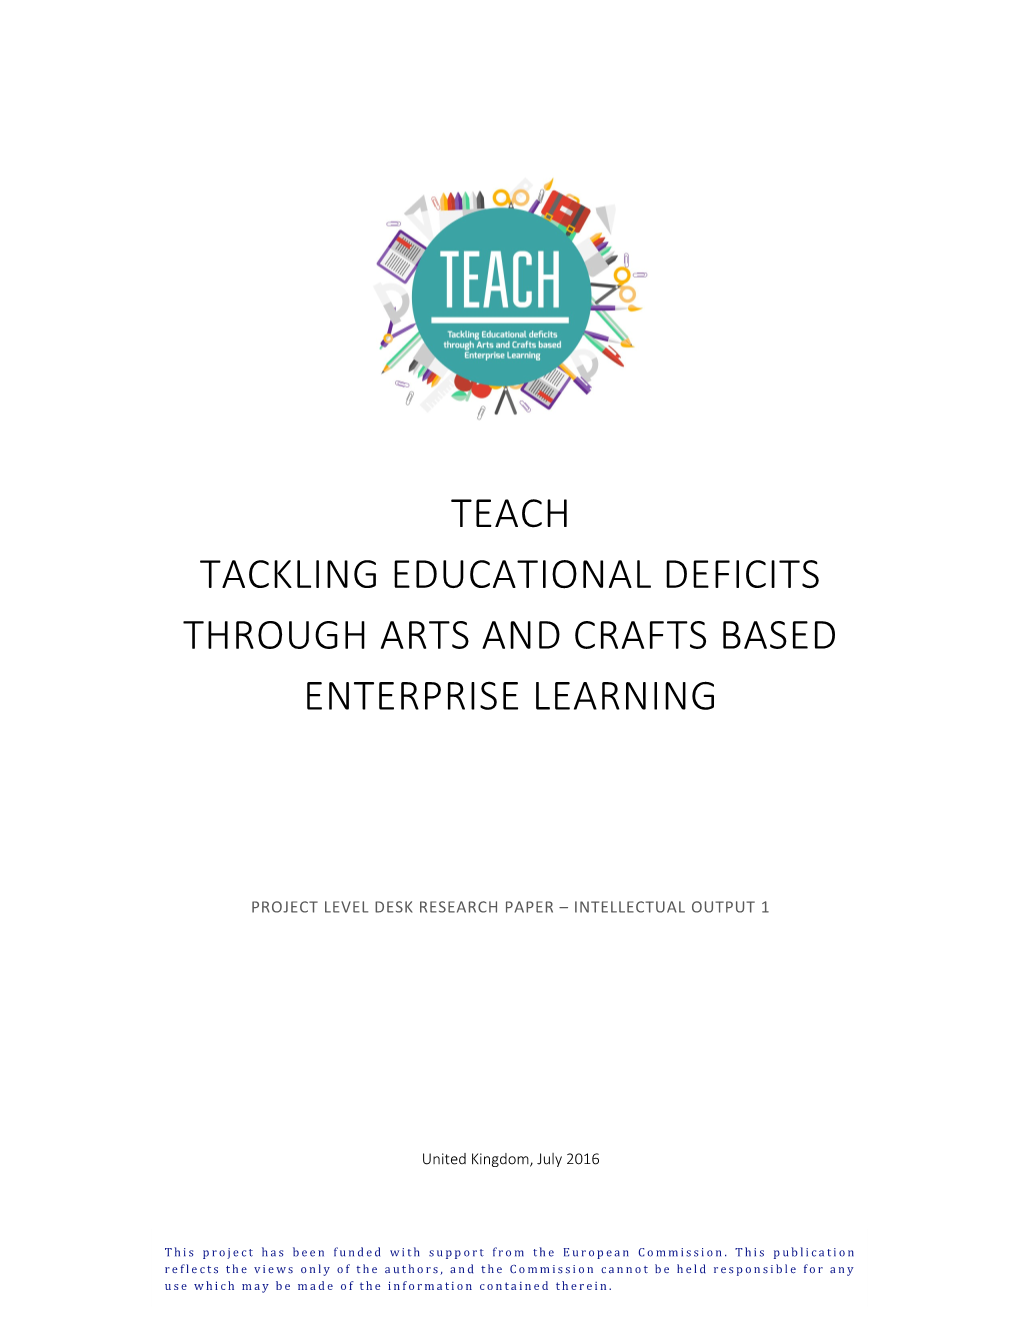 TEACH - Tackling Educational Deficits Through Arts and Crafts Based Enterprise Learning